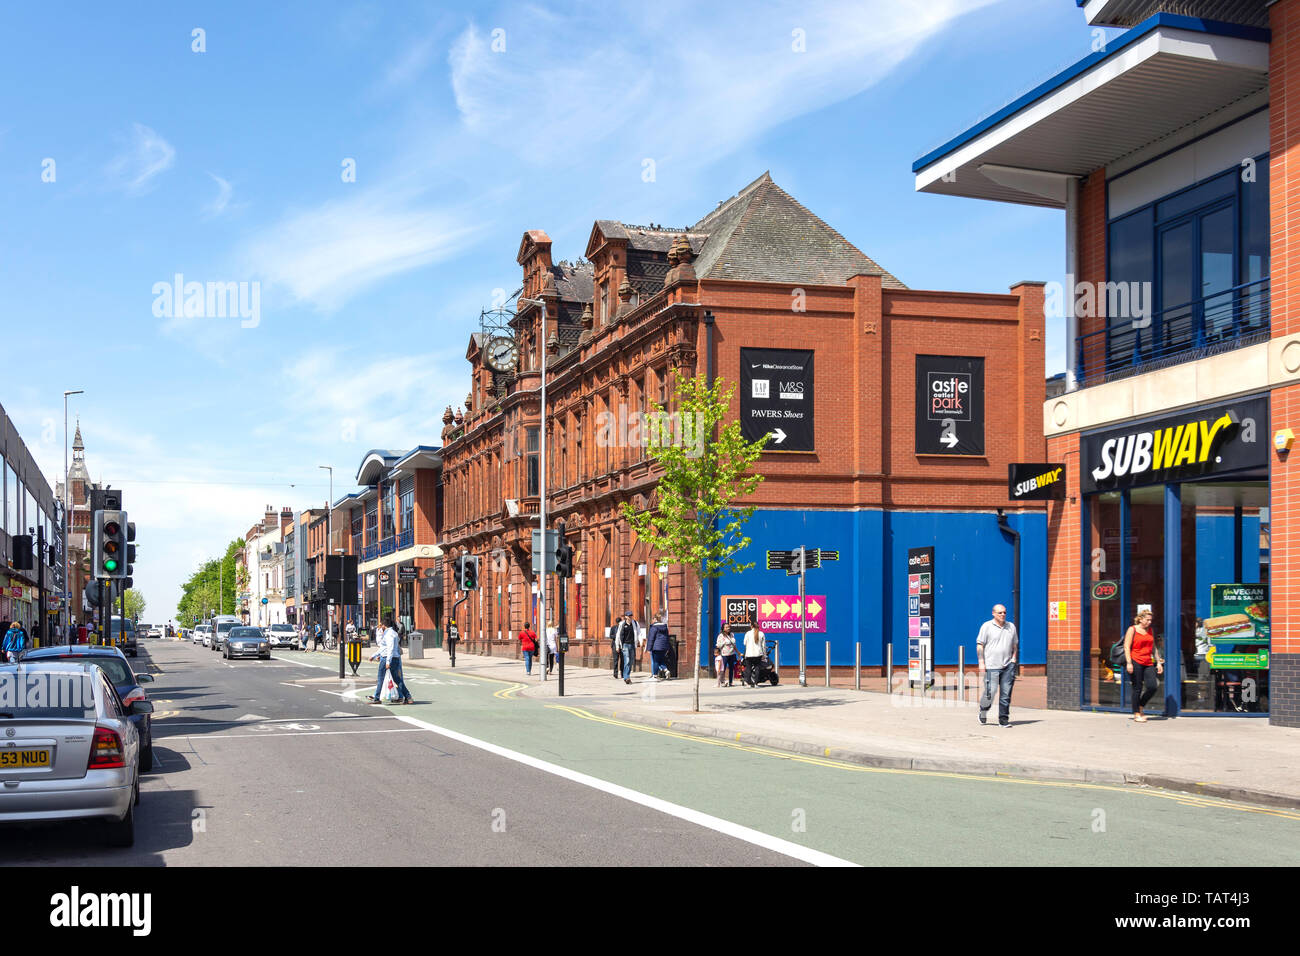 High Street, West Bromwich, West Midlands, England, Regno Unito Foto Stock